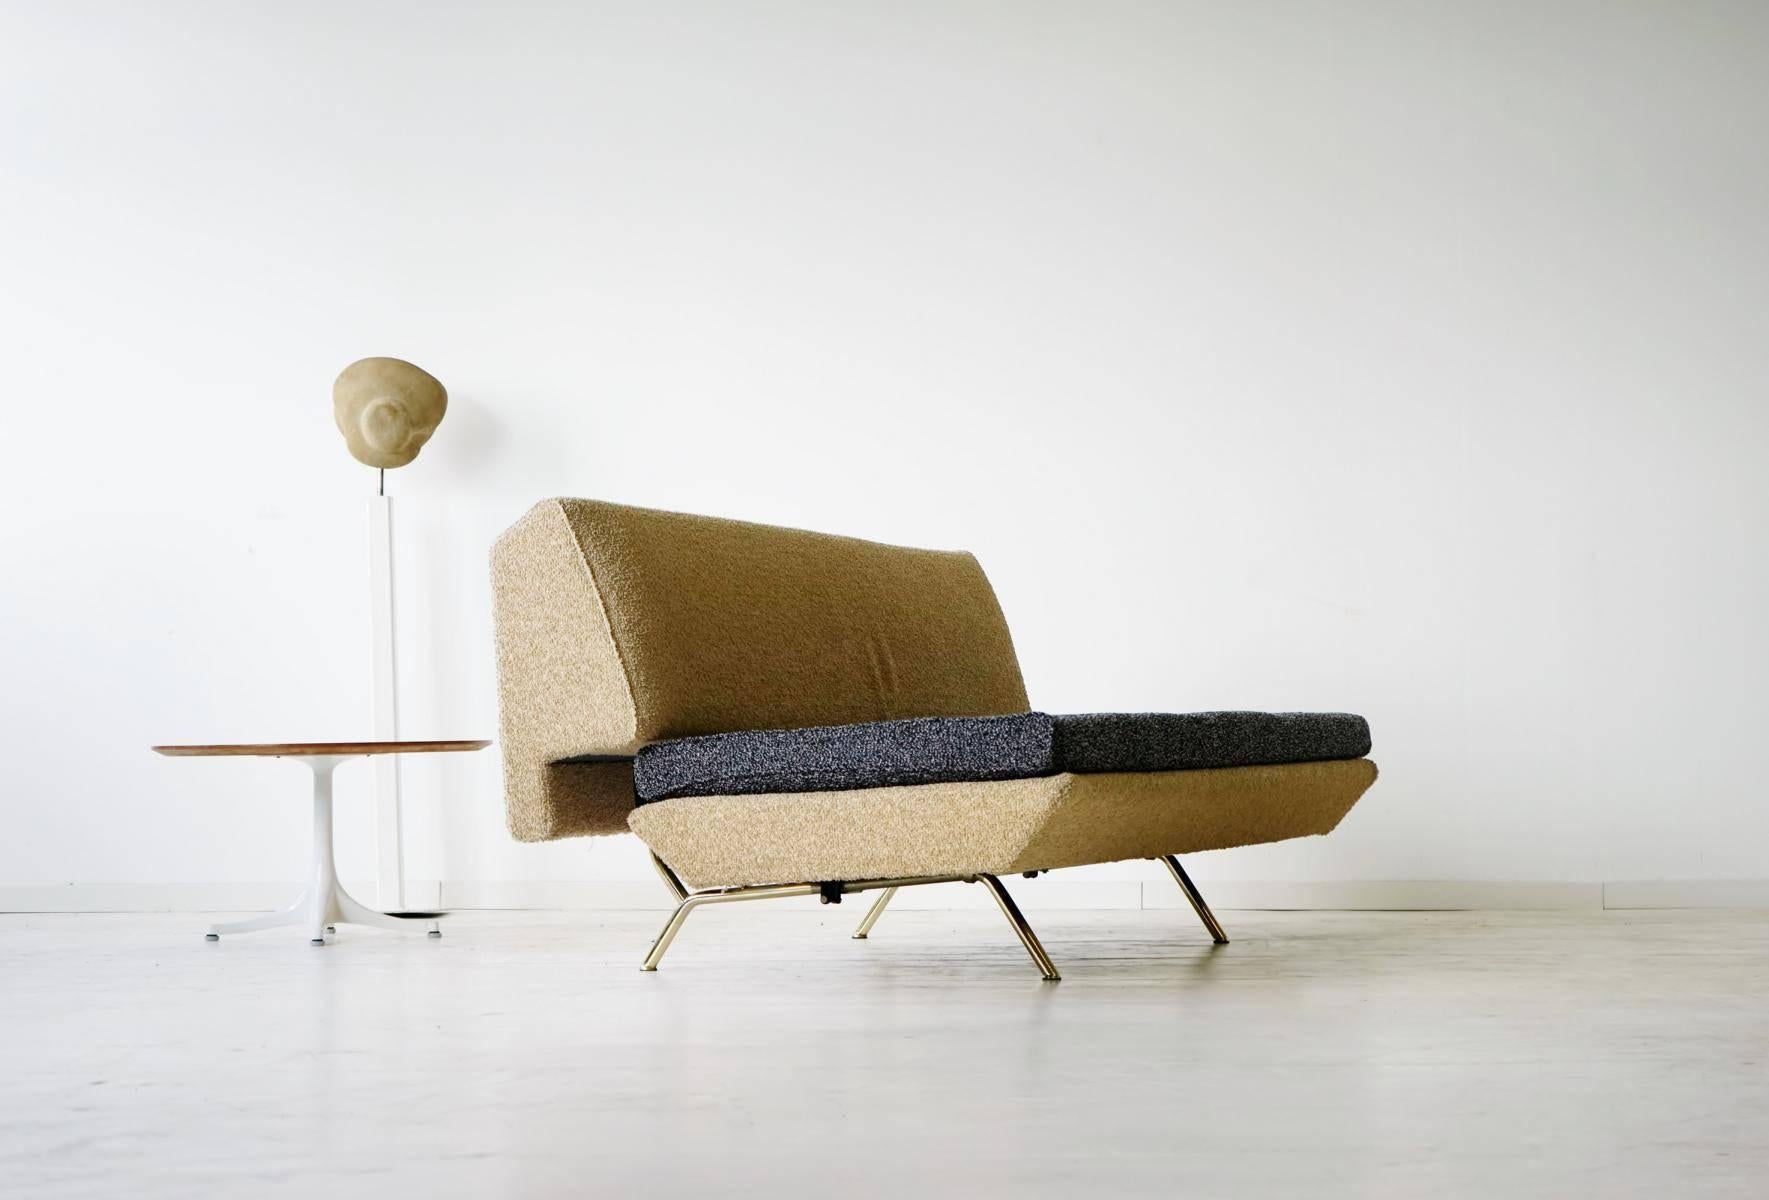 Sleep-O-Matic lounge sofa / daybed, 1950s, Marco Zanuso for Arflex

Sofa with pull-out function for sleeping. Practical sofa or daybed by Marco Zanuso, 1951.

Depth 90 cm/ 105 cm